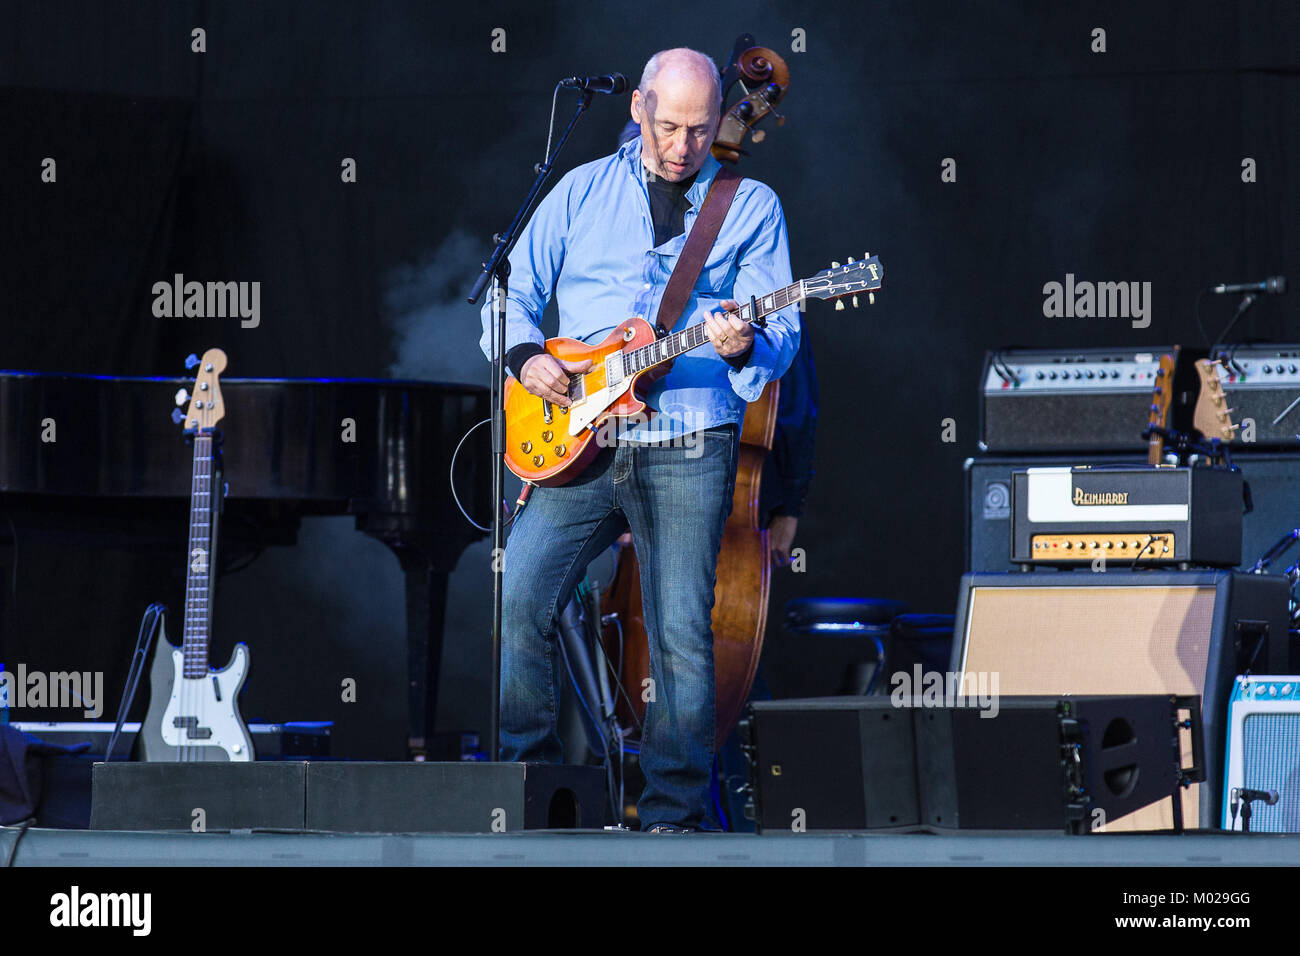 The British singer, songwriter and blues-rock musician Mark Knopfler  performs a live concert at the Norwegian music festival Norwegian Wood  2015. Mark Knopfler is also known as the lead singer for the